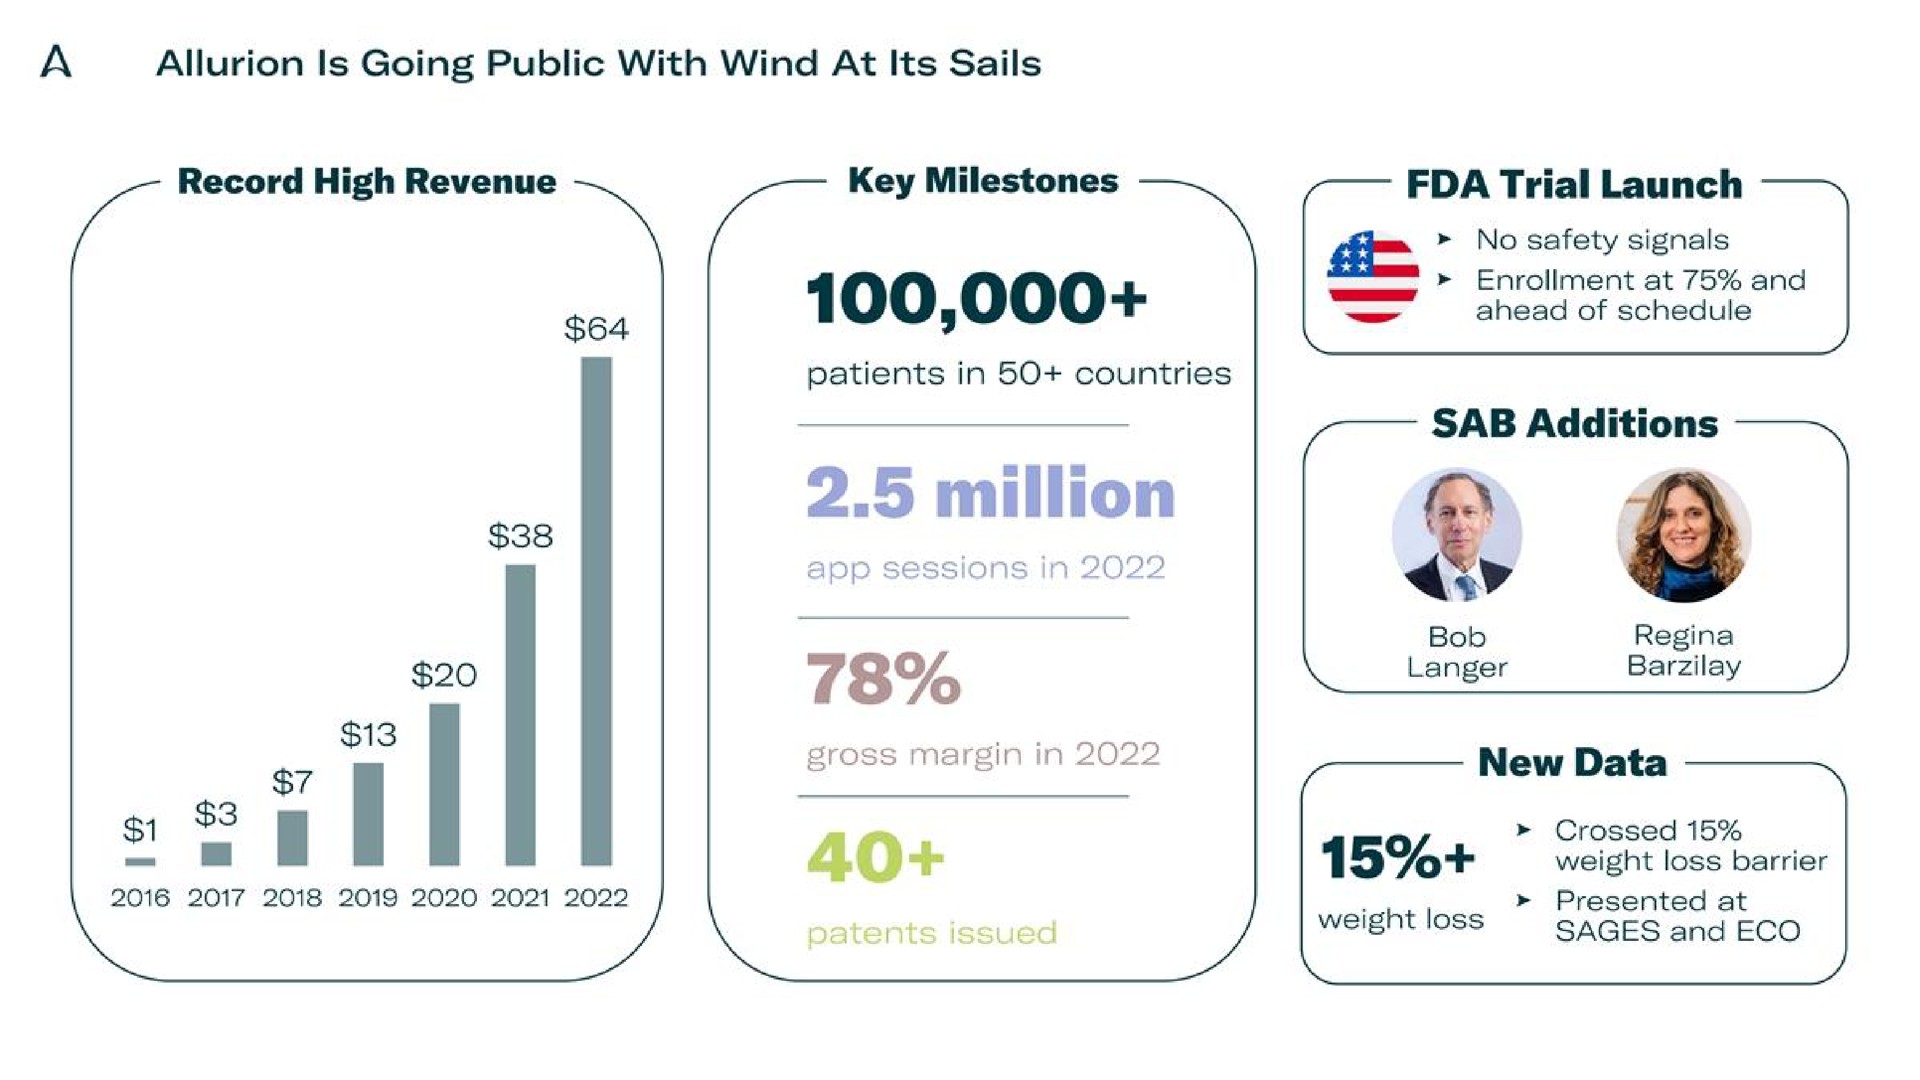 a is going public with wind at its sails record high revenue trial launch on sab additions | Allurion